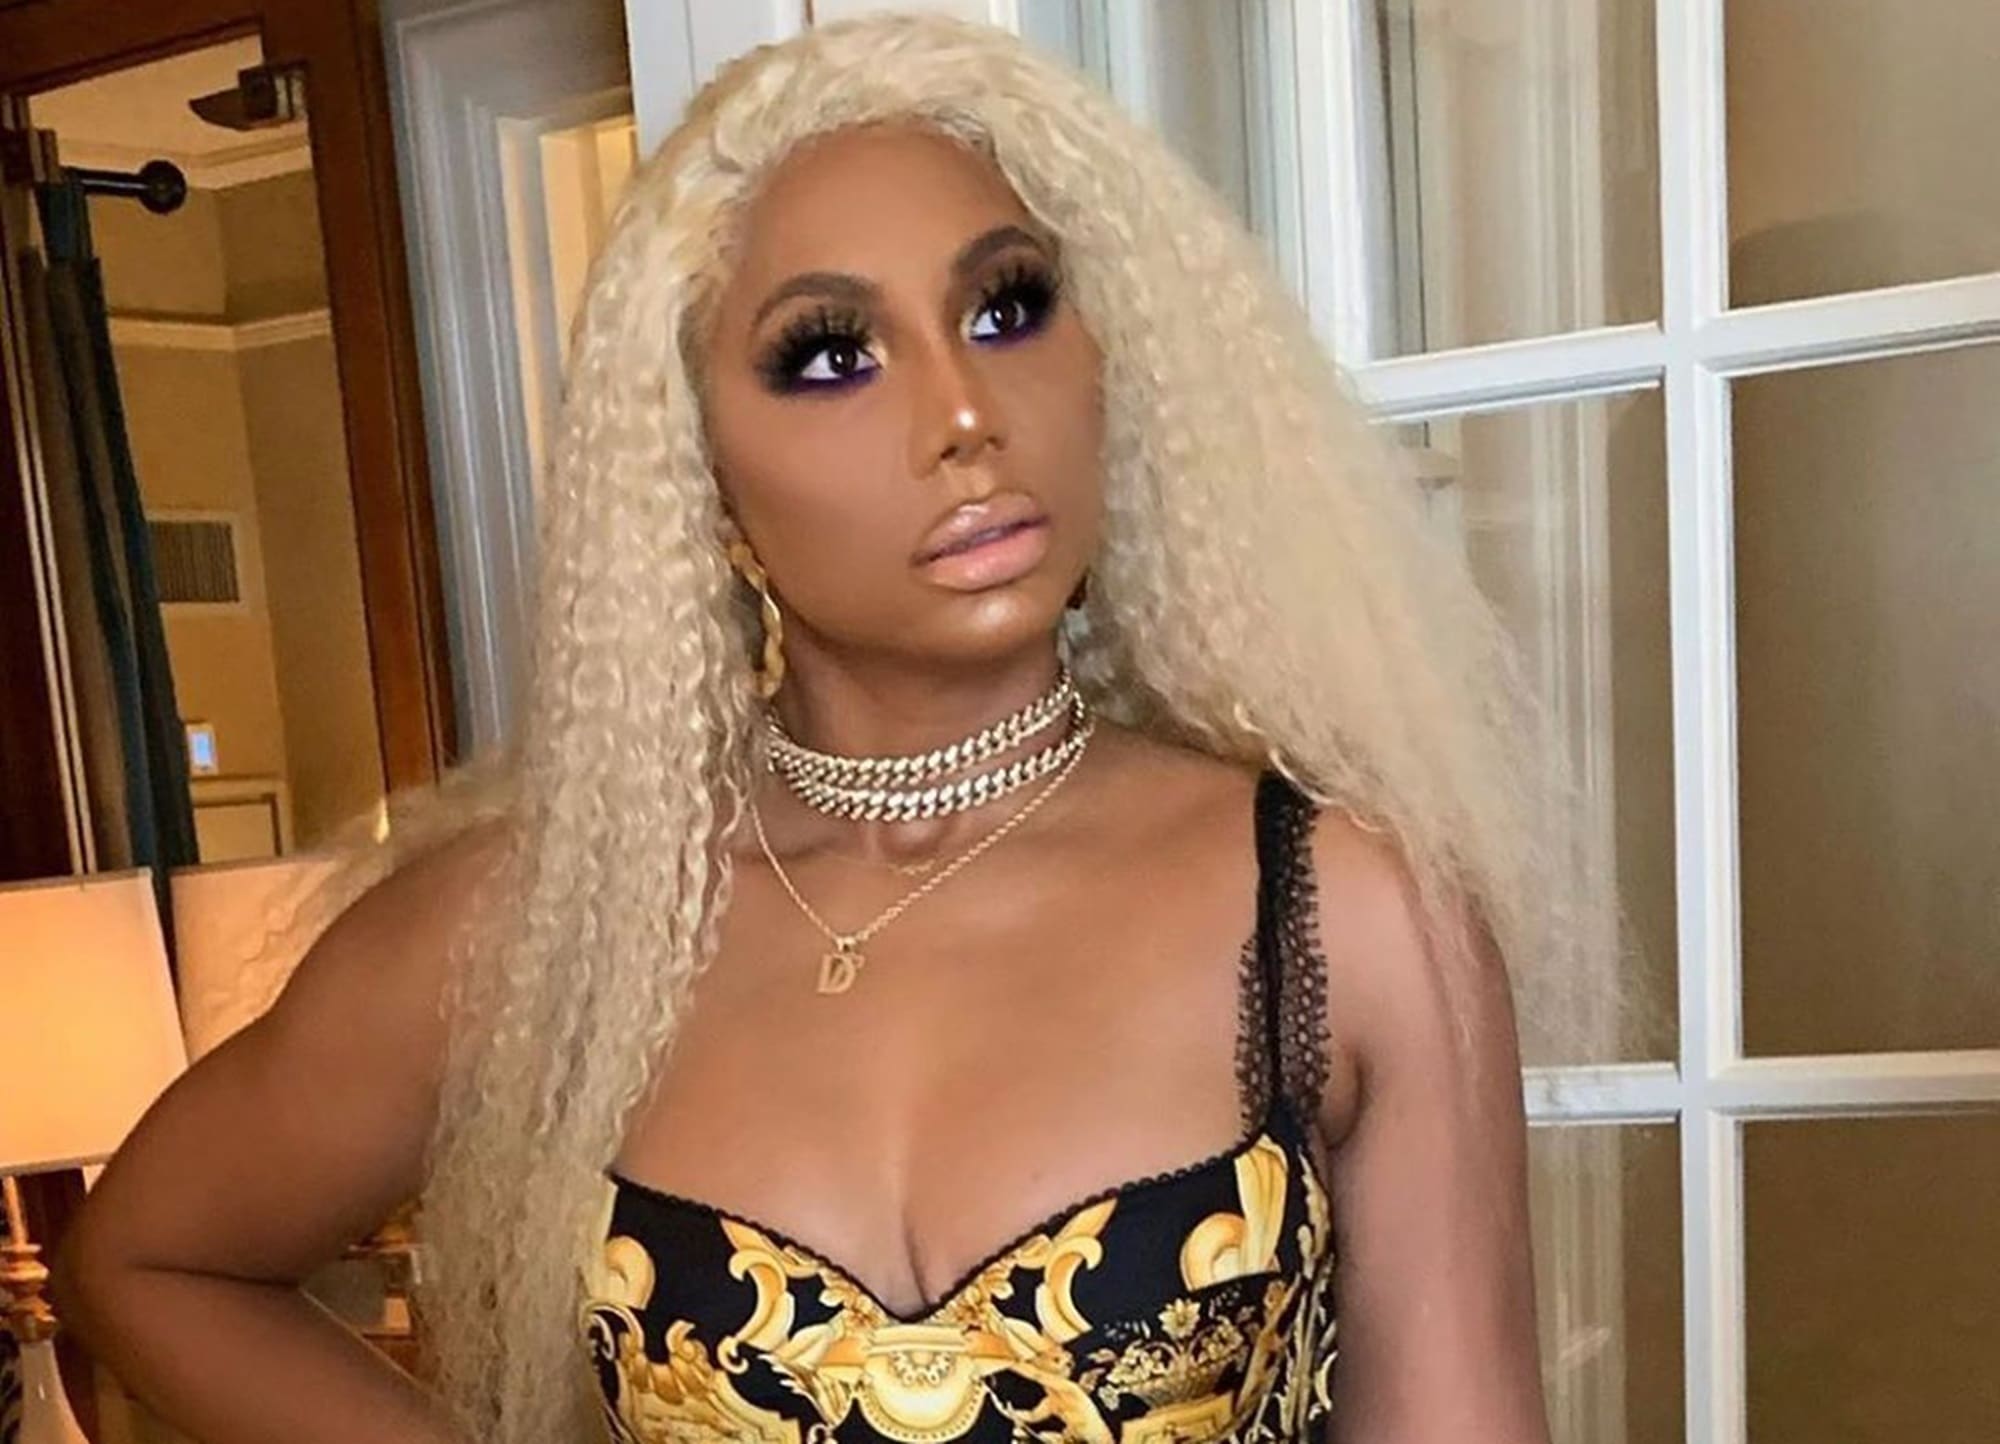 Tamar Braxton's Lingerie Video Has Fans Talking In The Comments, But David Adefeso Is here For It: 'Mamma Is Fine!'